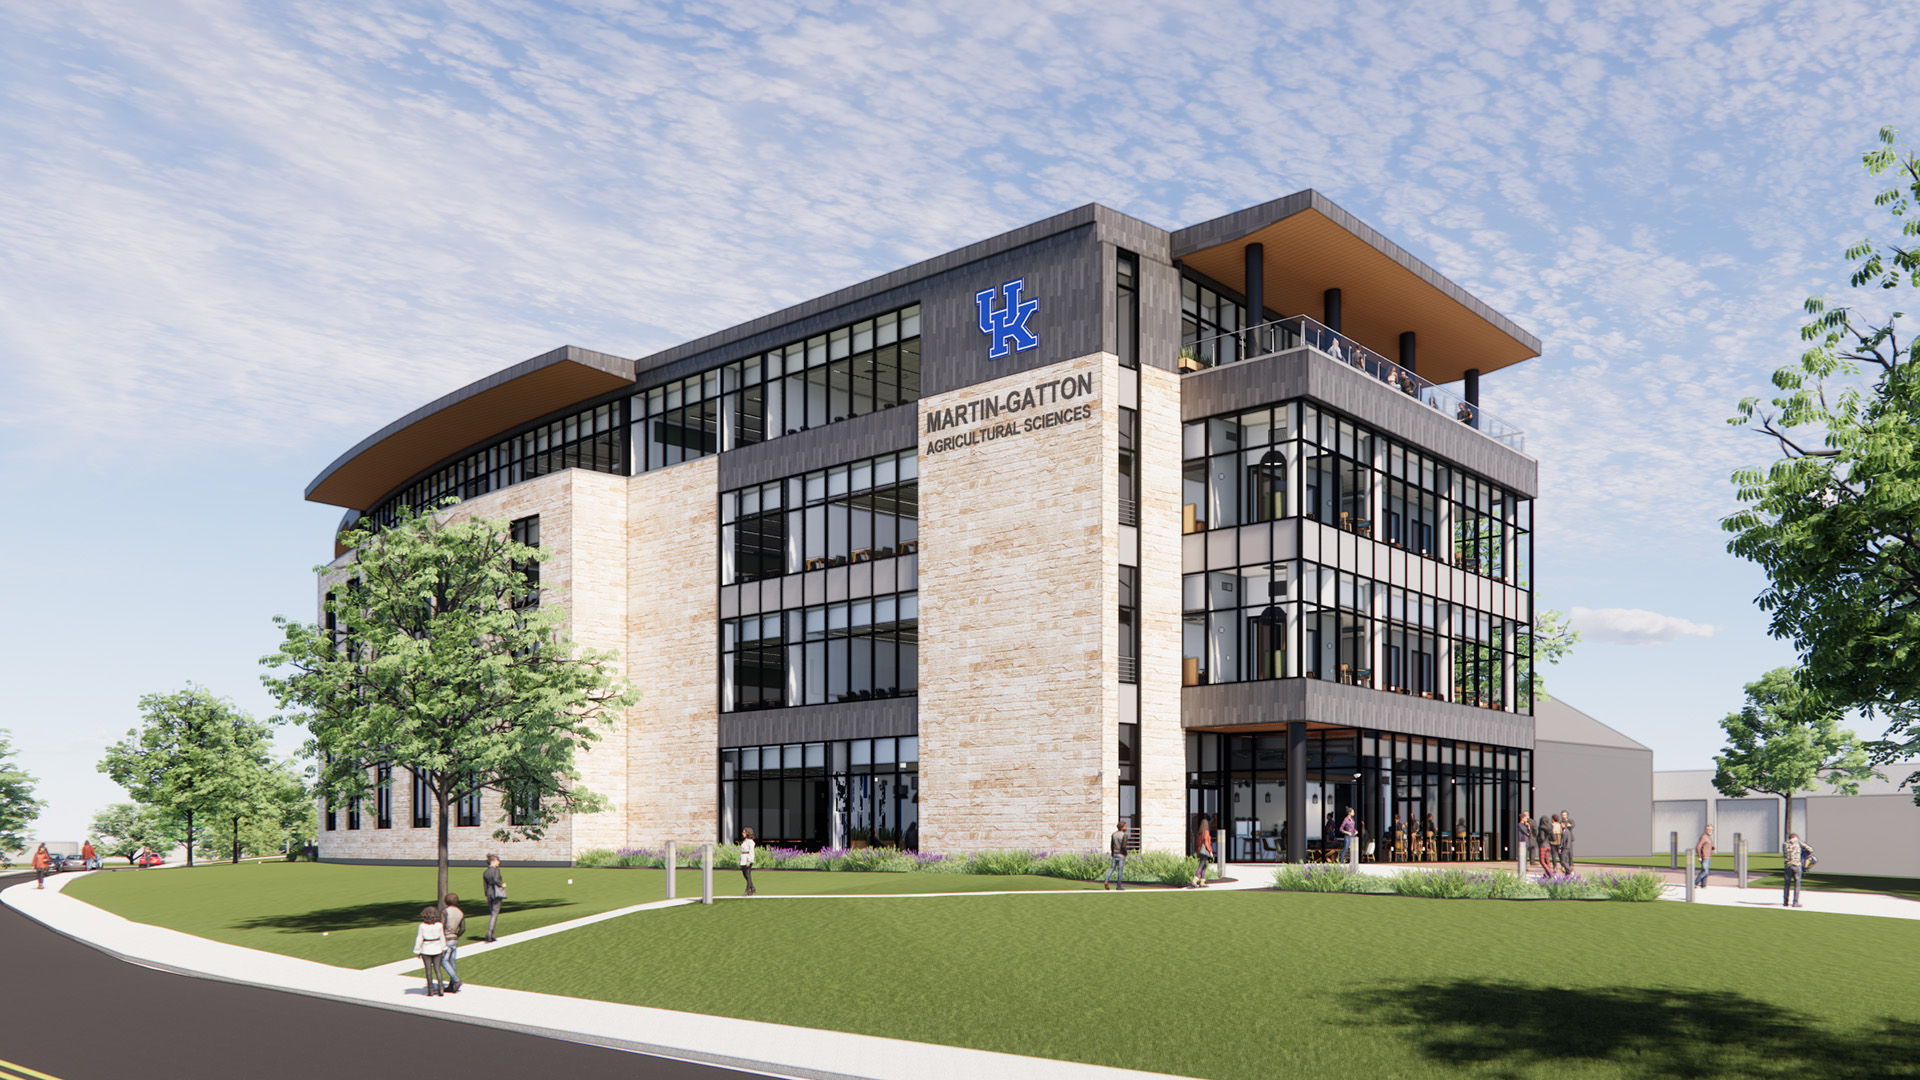 Building rendering which will span 66,000 square feet, is slated for 2026 and become the college’s primary teaching facility and student center.